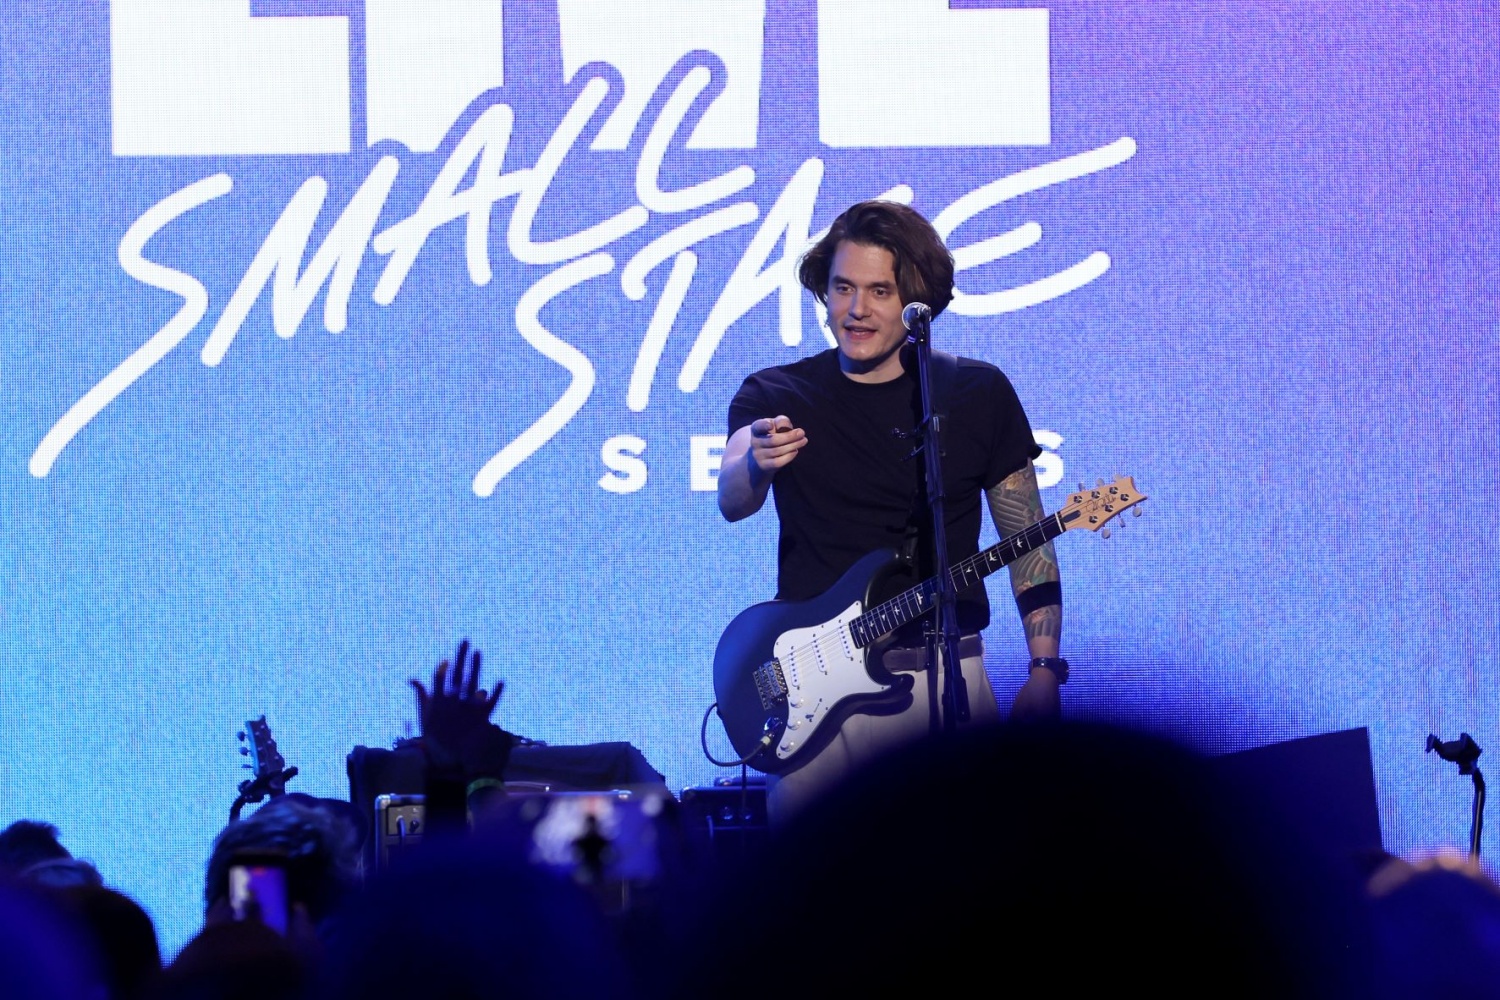  John Mayer Performs Live At The Hollywood Palladium For SiriusXM And Pandora's Small Stage Series In Los Angeles